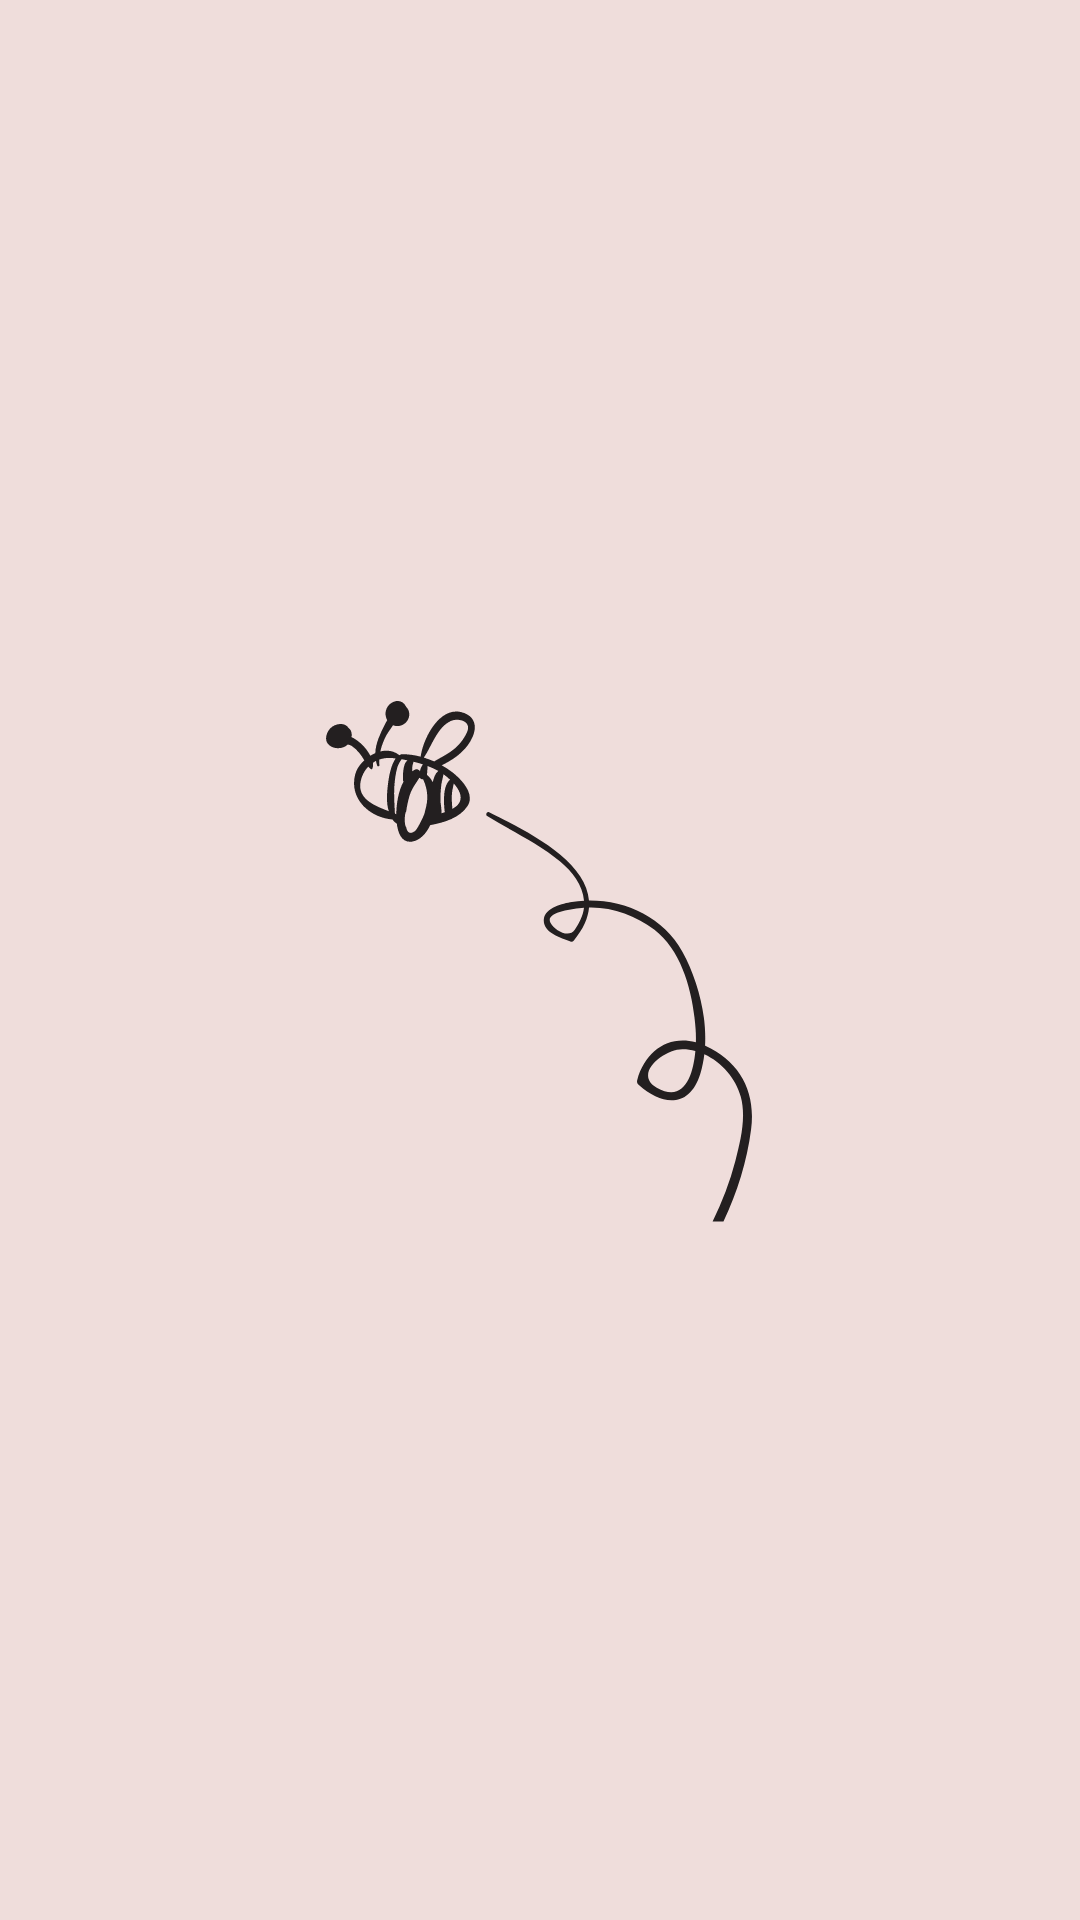 A drawing of two bees flying in the air - Phone, pretty, pink phone, spring, January, March, May, bee, cute, couple, cute iPhone, mental health